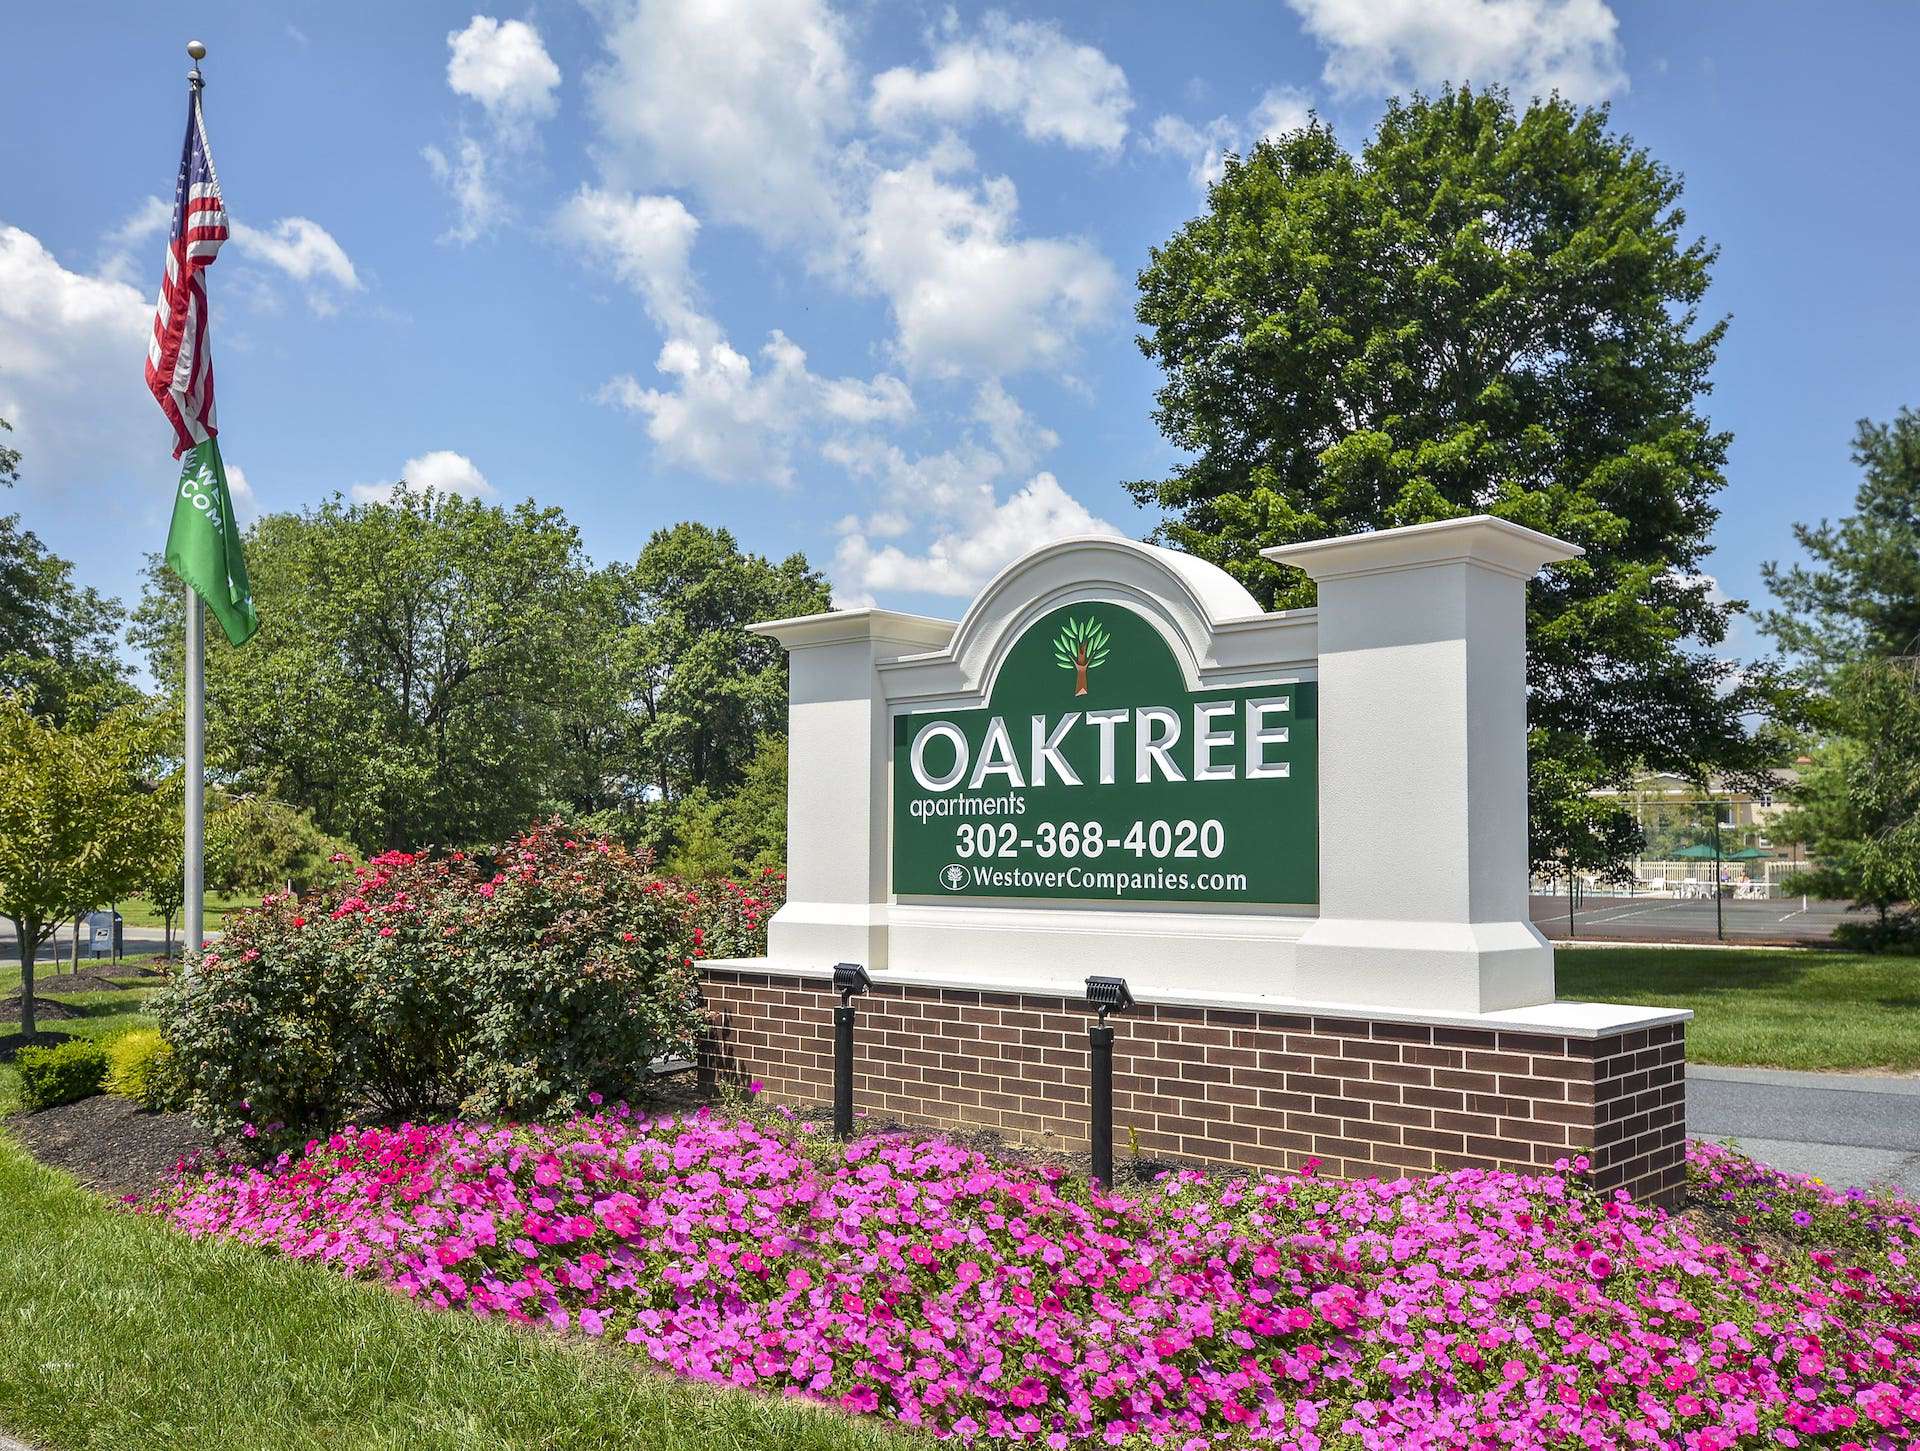 Oak Tree apartments welcome sign, fitted in a beautiful garden